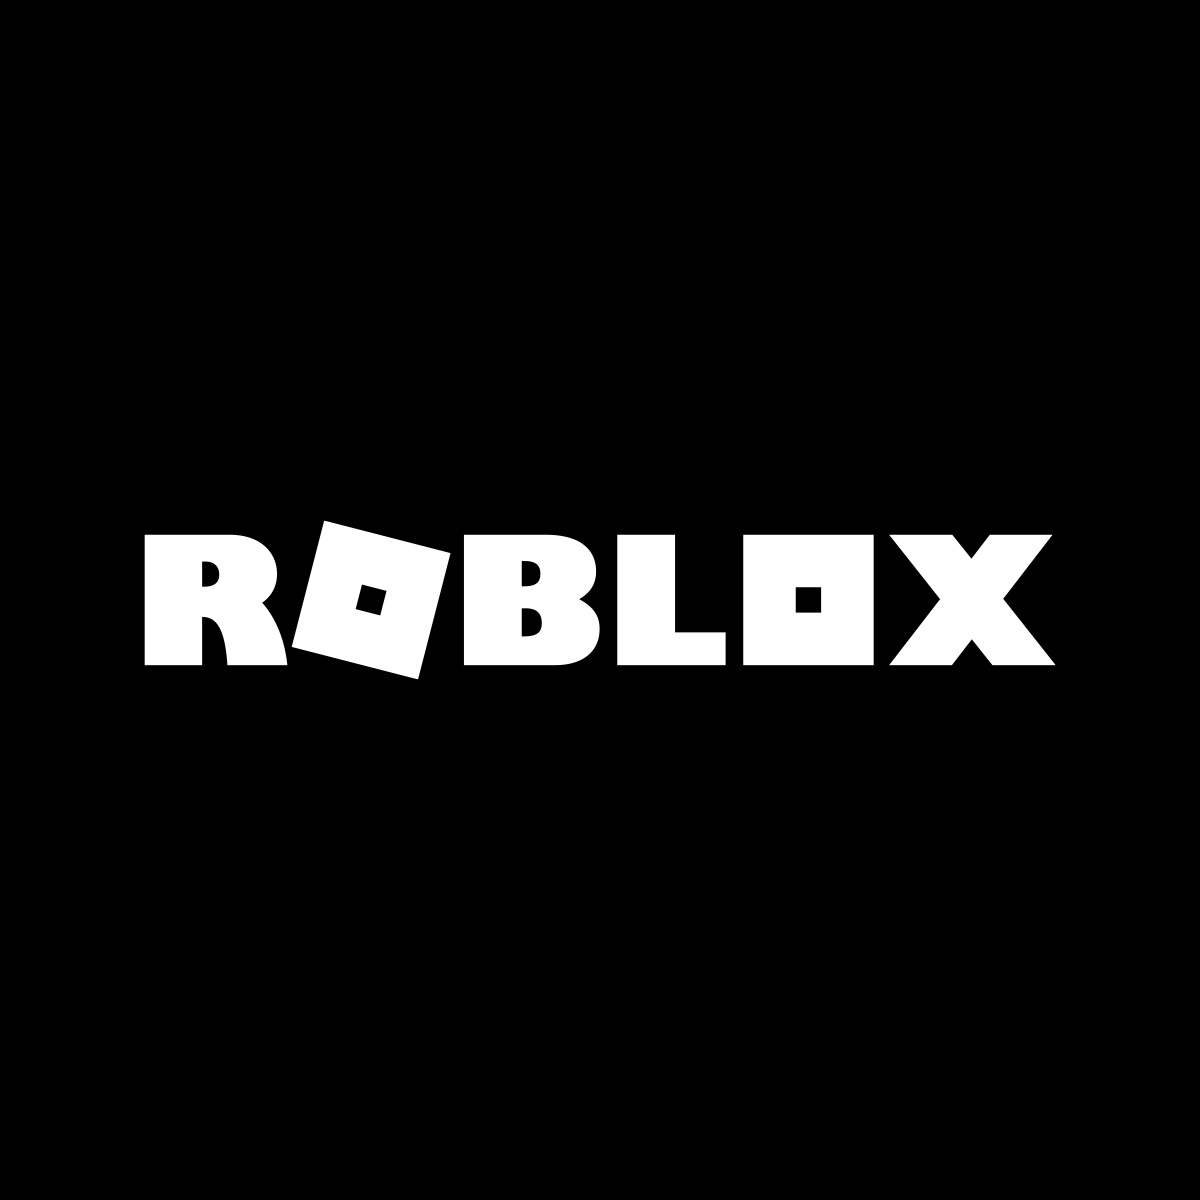 How To Add Roblox To My Home Screen